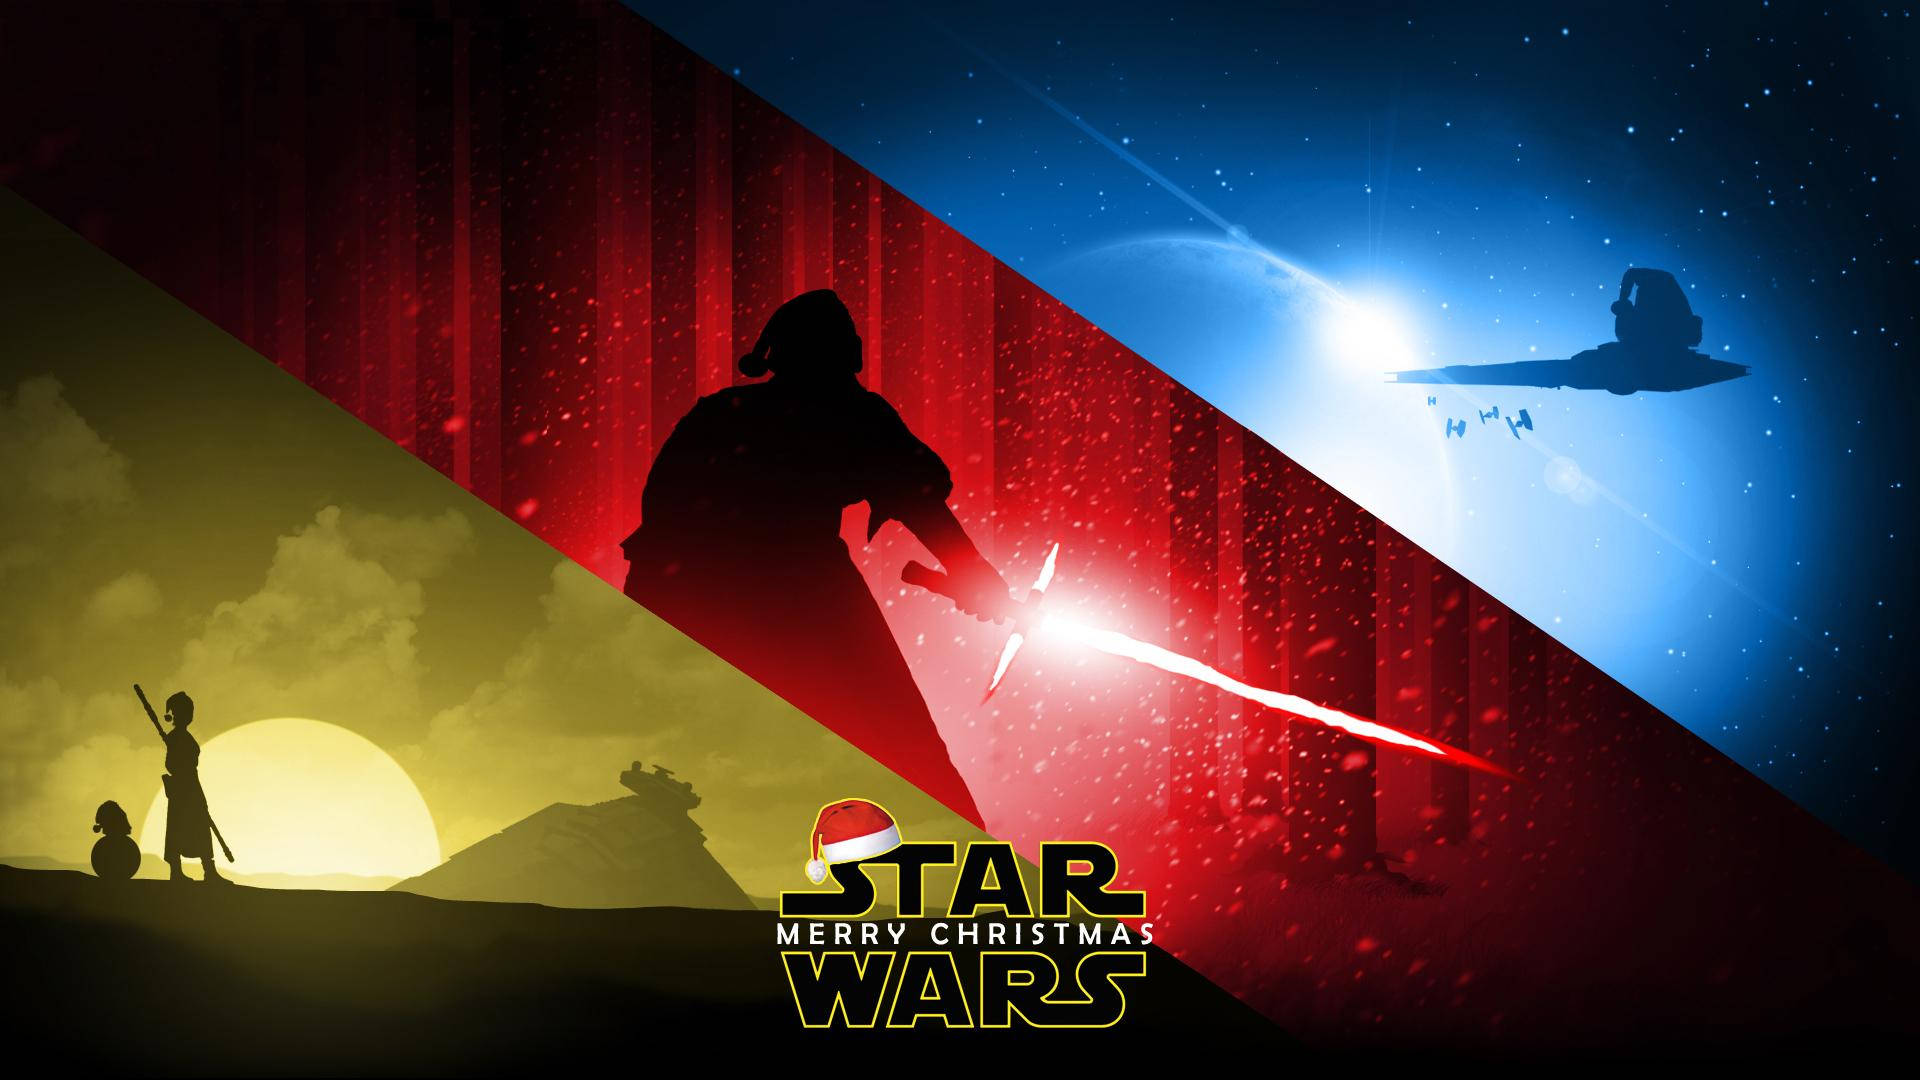 Light up the holiday season with Star Wars! Wallpaper